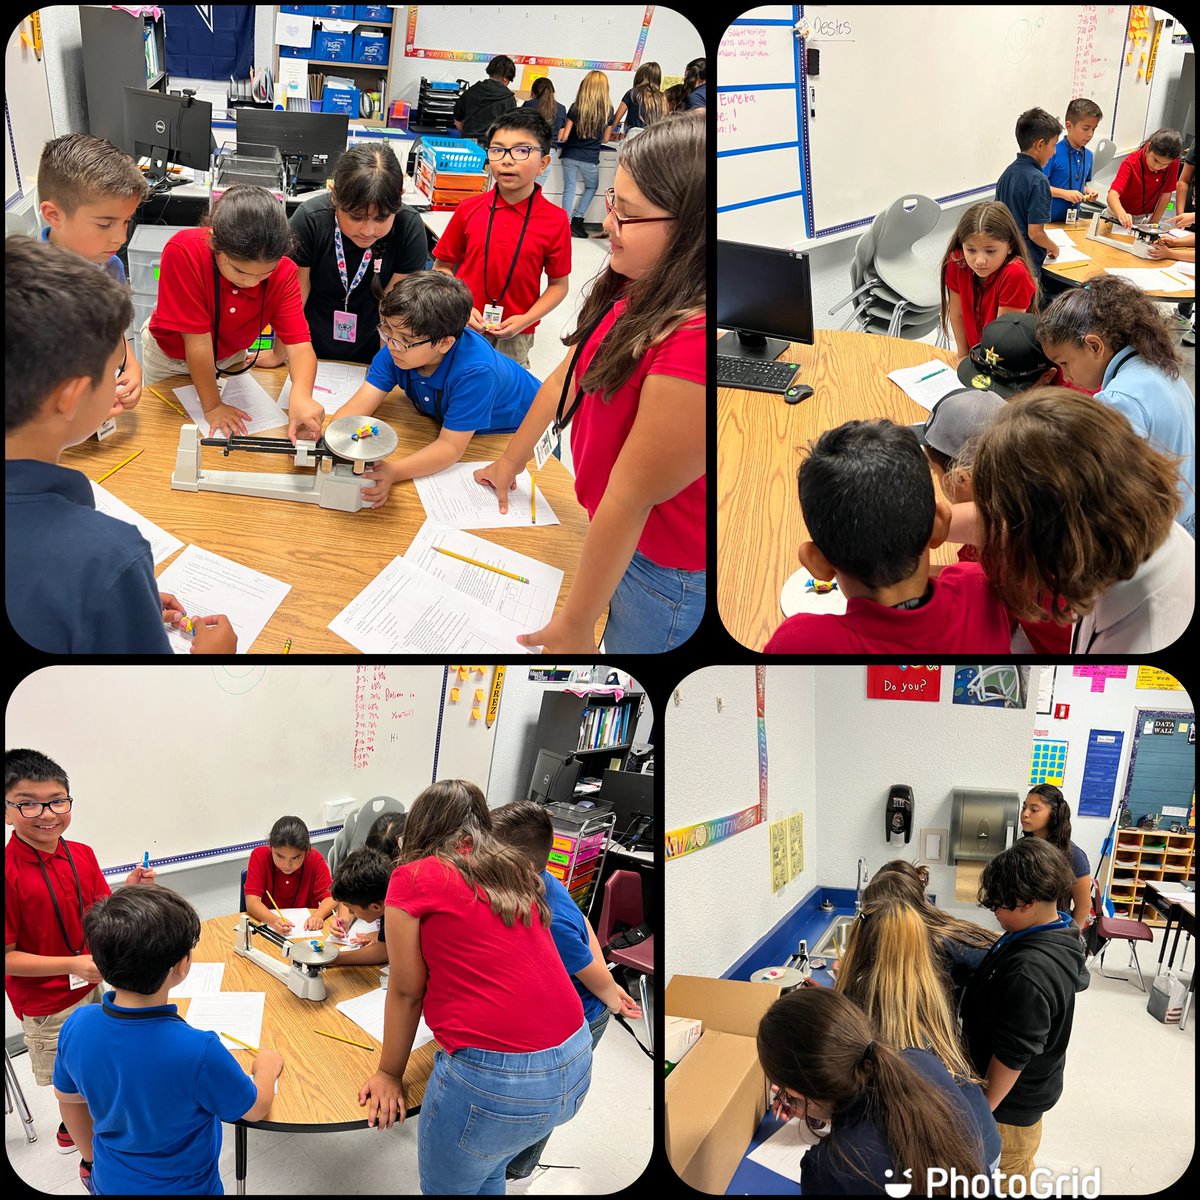 A busy and fun day in our 4th grade classroom. We started the day with a math review using Ball Toss Boogie. Then spent some time at makerspace, and we ended the day with a bubble gum lab. The kids and I really enjoyed it! #DHEBobcats #WeAreClintISD